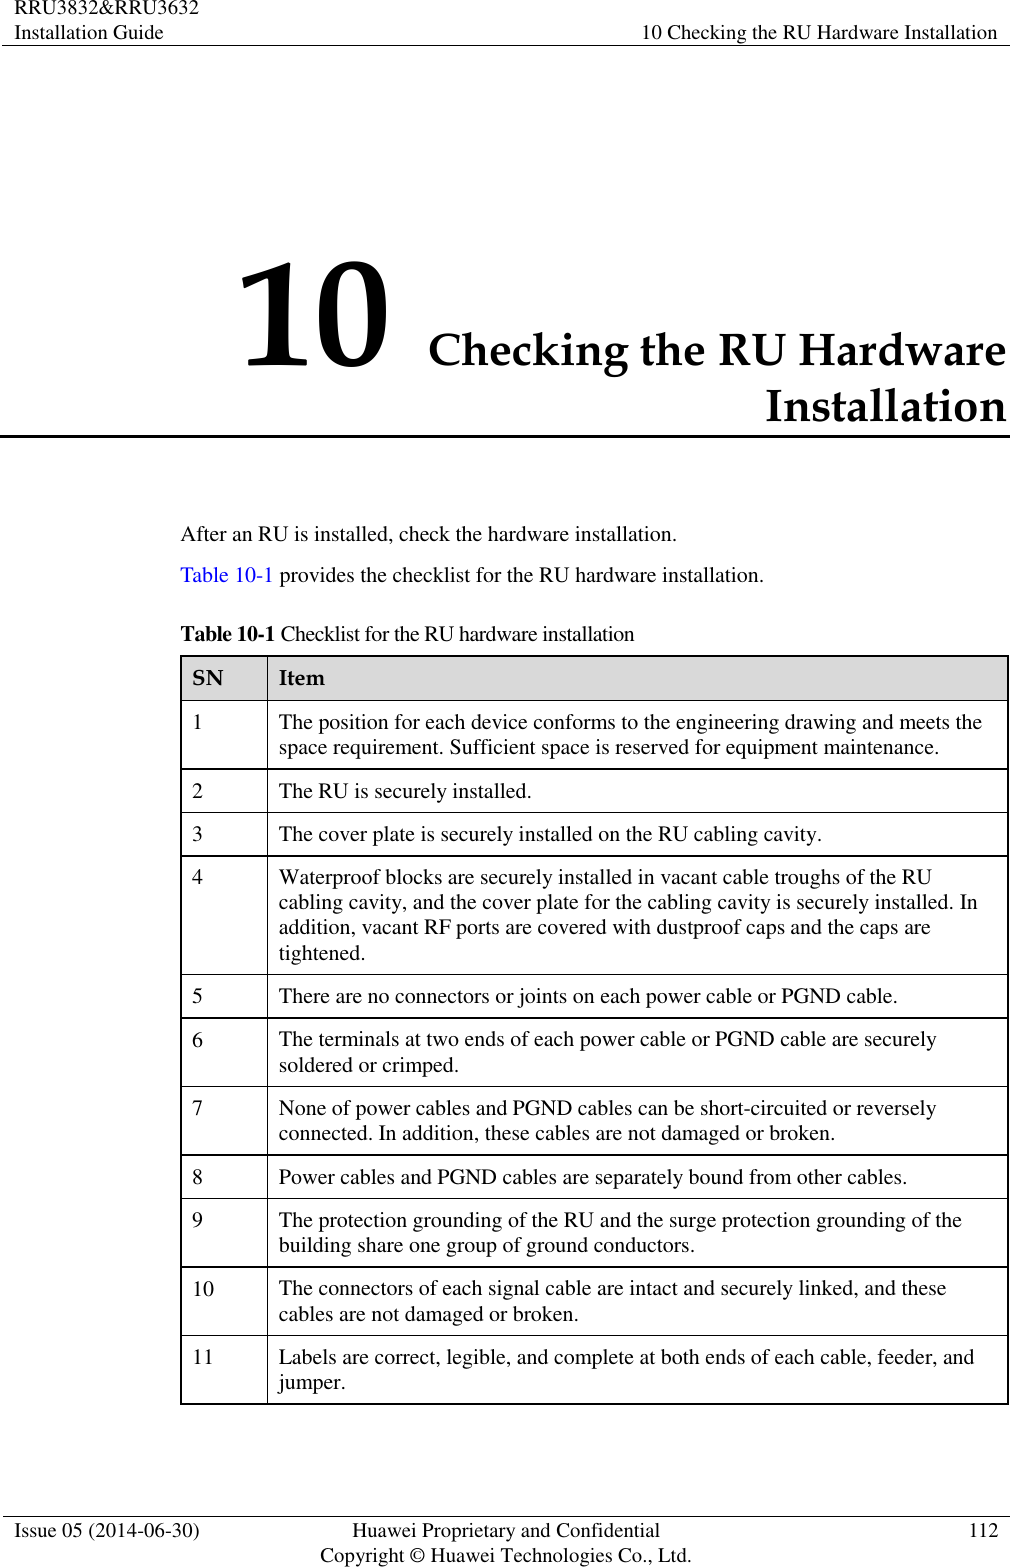 RRU3832&amp;RRU3632 Installation Guide 10 Checking the RU Hardware Installation  Issue 05 (2014-06-30) Huawei Proprietary and Confidential                                     Copyright © Huawei Technologies Co., Ltd. 112  10 Checking the RU Hardware Installation After an RU is installed, check the hardware installation.   Table 10-1 provides the checklist for the RU hardware installation. Table 10-1 Checklist for the RU hardware installation SN Item 1 The position for each device conforms to the engineering drawing and meets the space requirement. Sufficient space is reserved for equipment maintenance.   2 The RU is securely installed. 3 The cover plate is securely installed on the RU cabling cavity.   4 Waterproof blocks are securely installed in vacant cable troughs of the RU cabling cavity, and the cover plate for the cabling cavity is securely installed. In addition, vacant RF ports are covered with dustproof caps and the caps are tightened. 5 There are no connectors or joints on each power cable or PGND cable.   6 The terminals at two ends of each power cable or PGND cable are securely soldered or crimped. 7 None of power cables and PGND cables can be short-circuited or reversely connected. In addition, these cables are not damaged or broken. 8 Power cables and PGND cables are separately bound from other cables.   9 The protection grounding of the RU and the surge protection grounding of the building share one group of ground conductors. 10 The connectors of each signal cable are intact and securely linked, and these cables are not damaged or broken. 11 Labels are correct, legible, and complete at both ends of each cable, feeder, and jumper. 